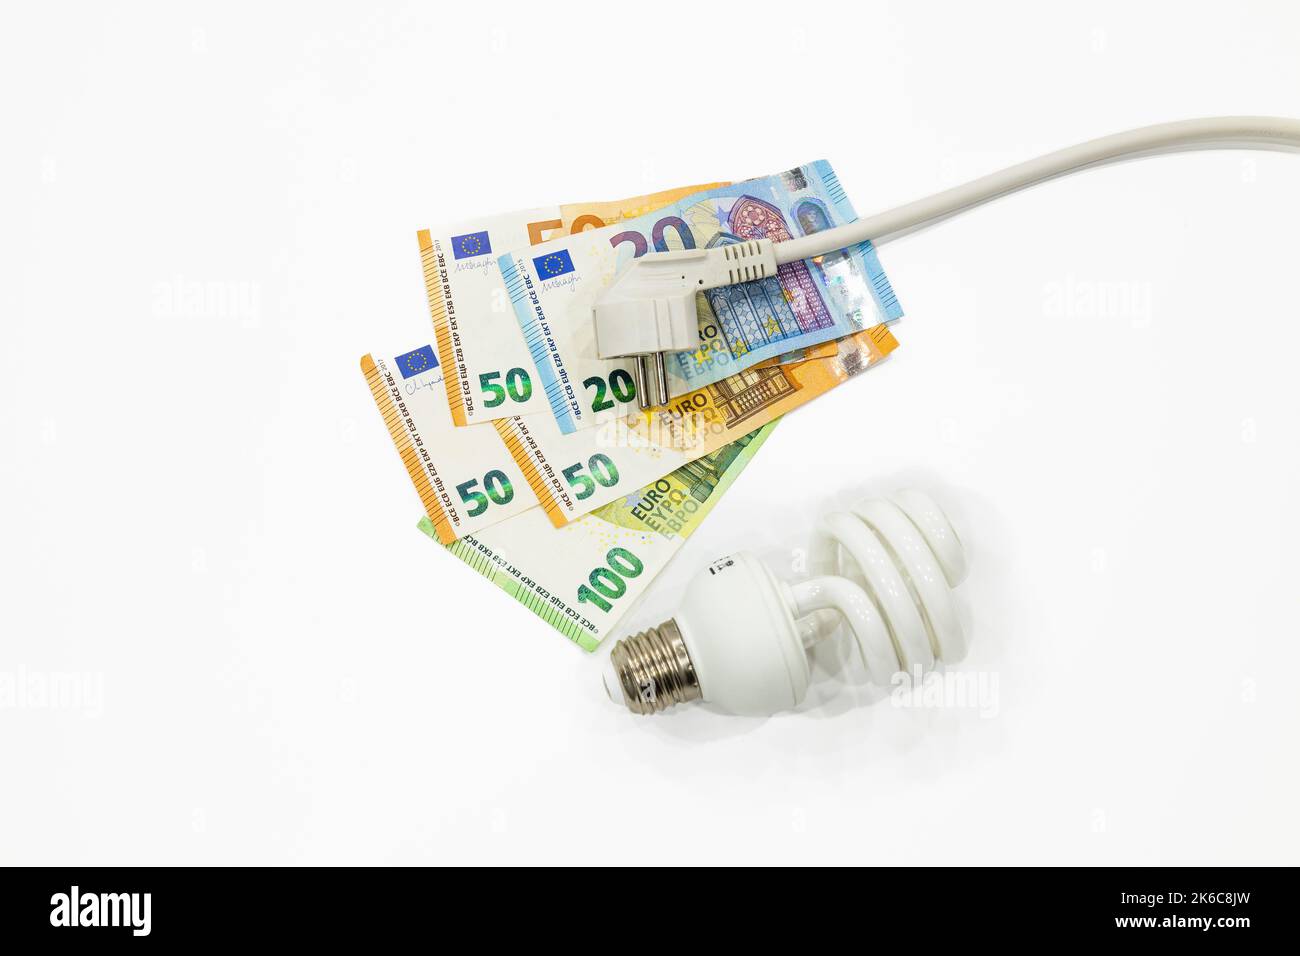 Electric plug, light bulb, and the euro money banknotes. Concept of expensive electricity costs Stock Photo